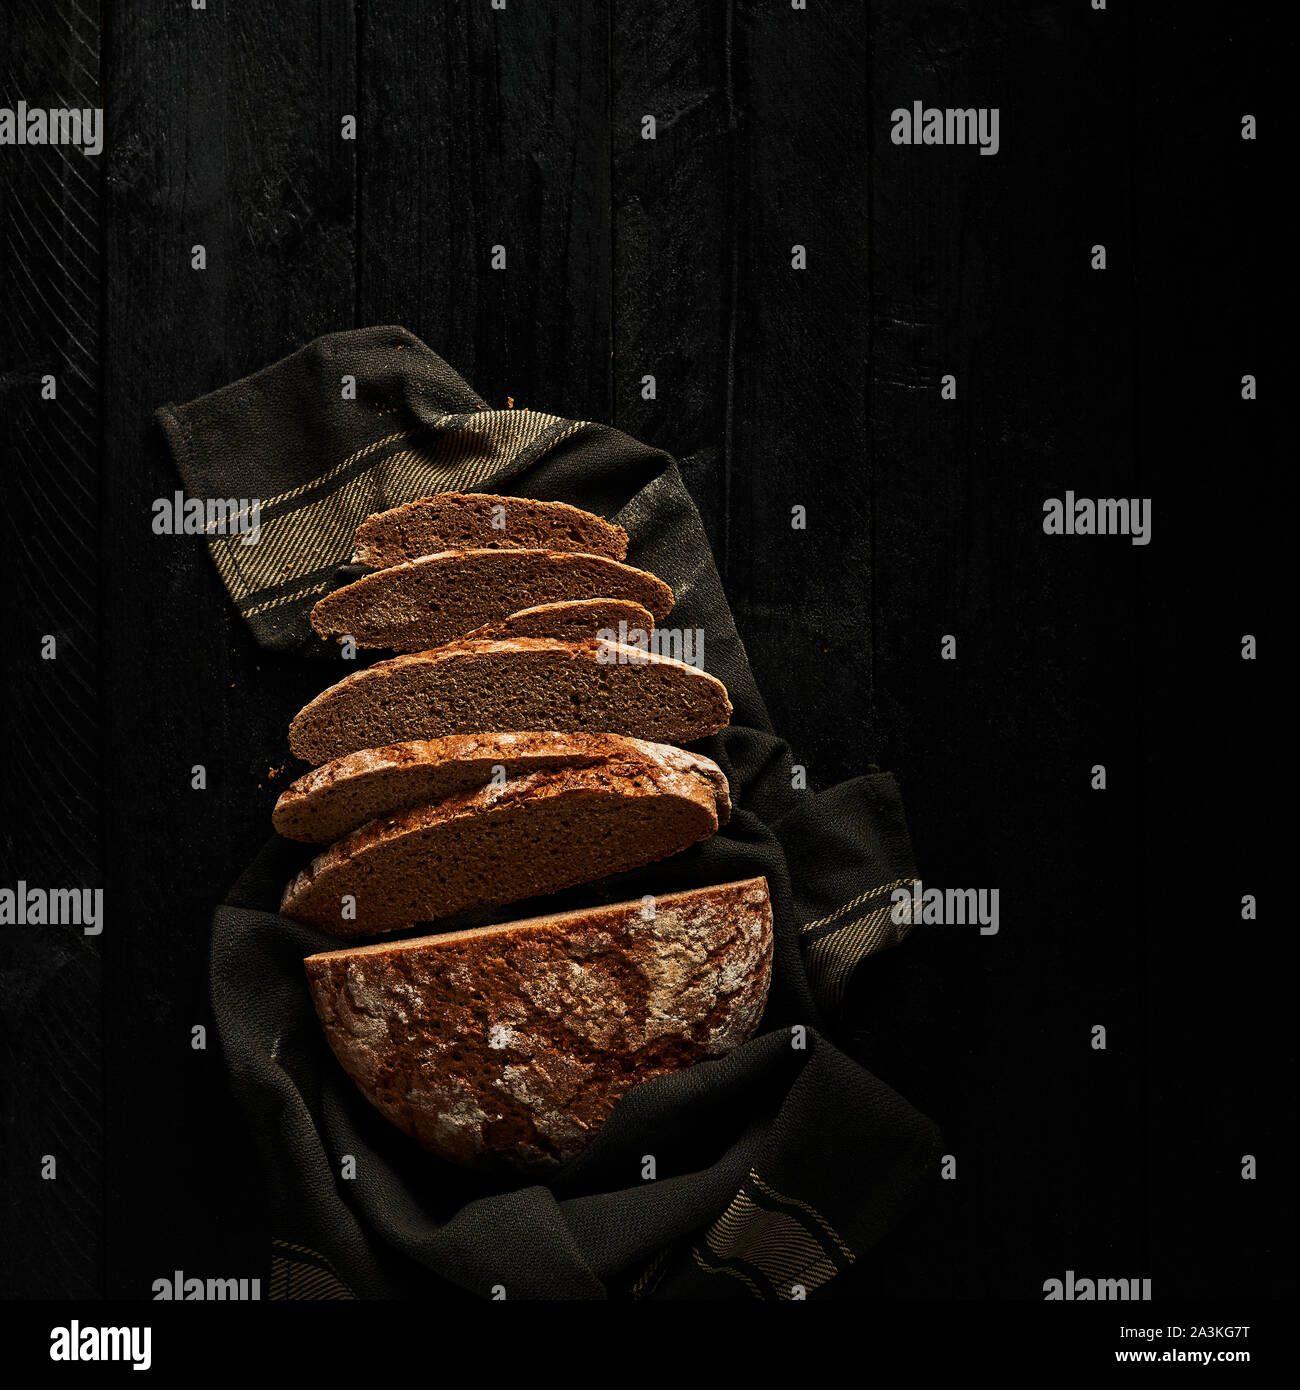 Sliced bread on black wooden background. Top view. Copy space. Square crop. Stock Photo